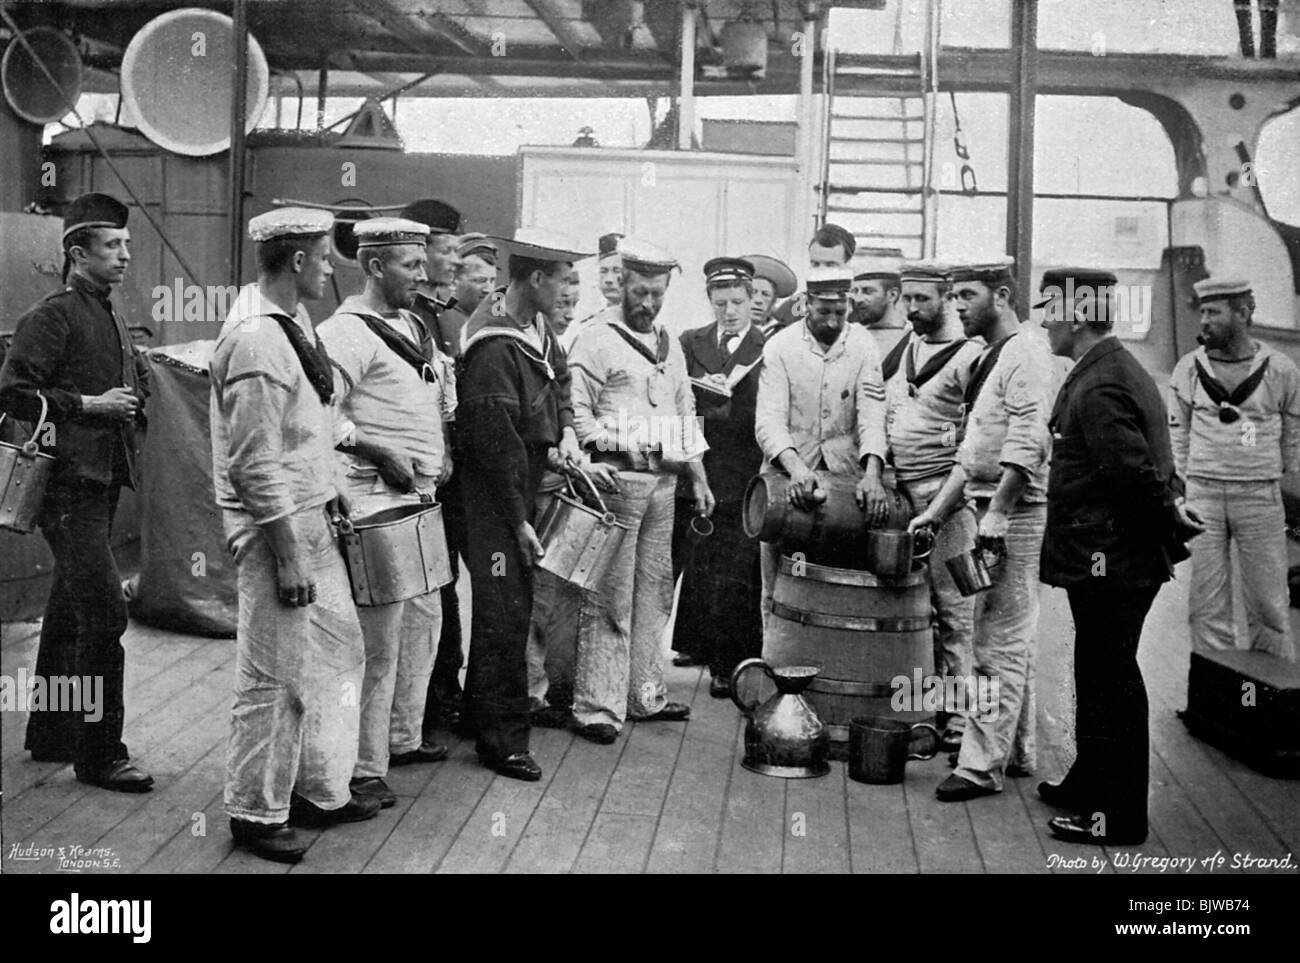 Issuing rum on board HMS 'Royal Sovereign', 1896. Artist: W Gregory Stock Photo